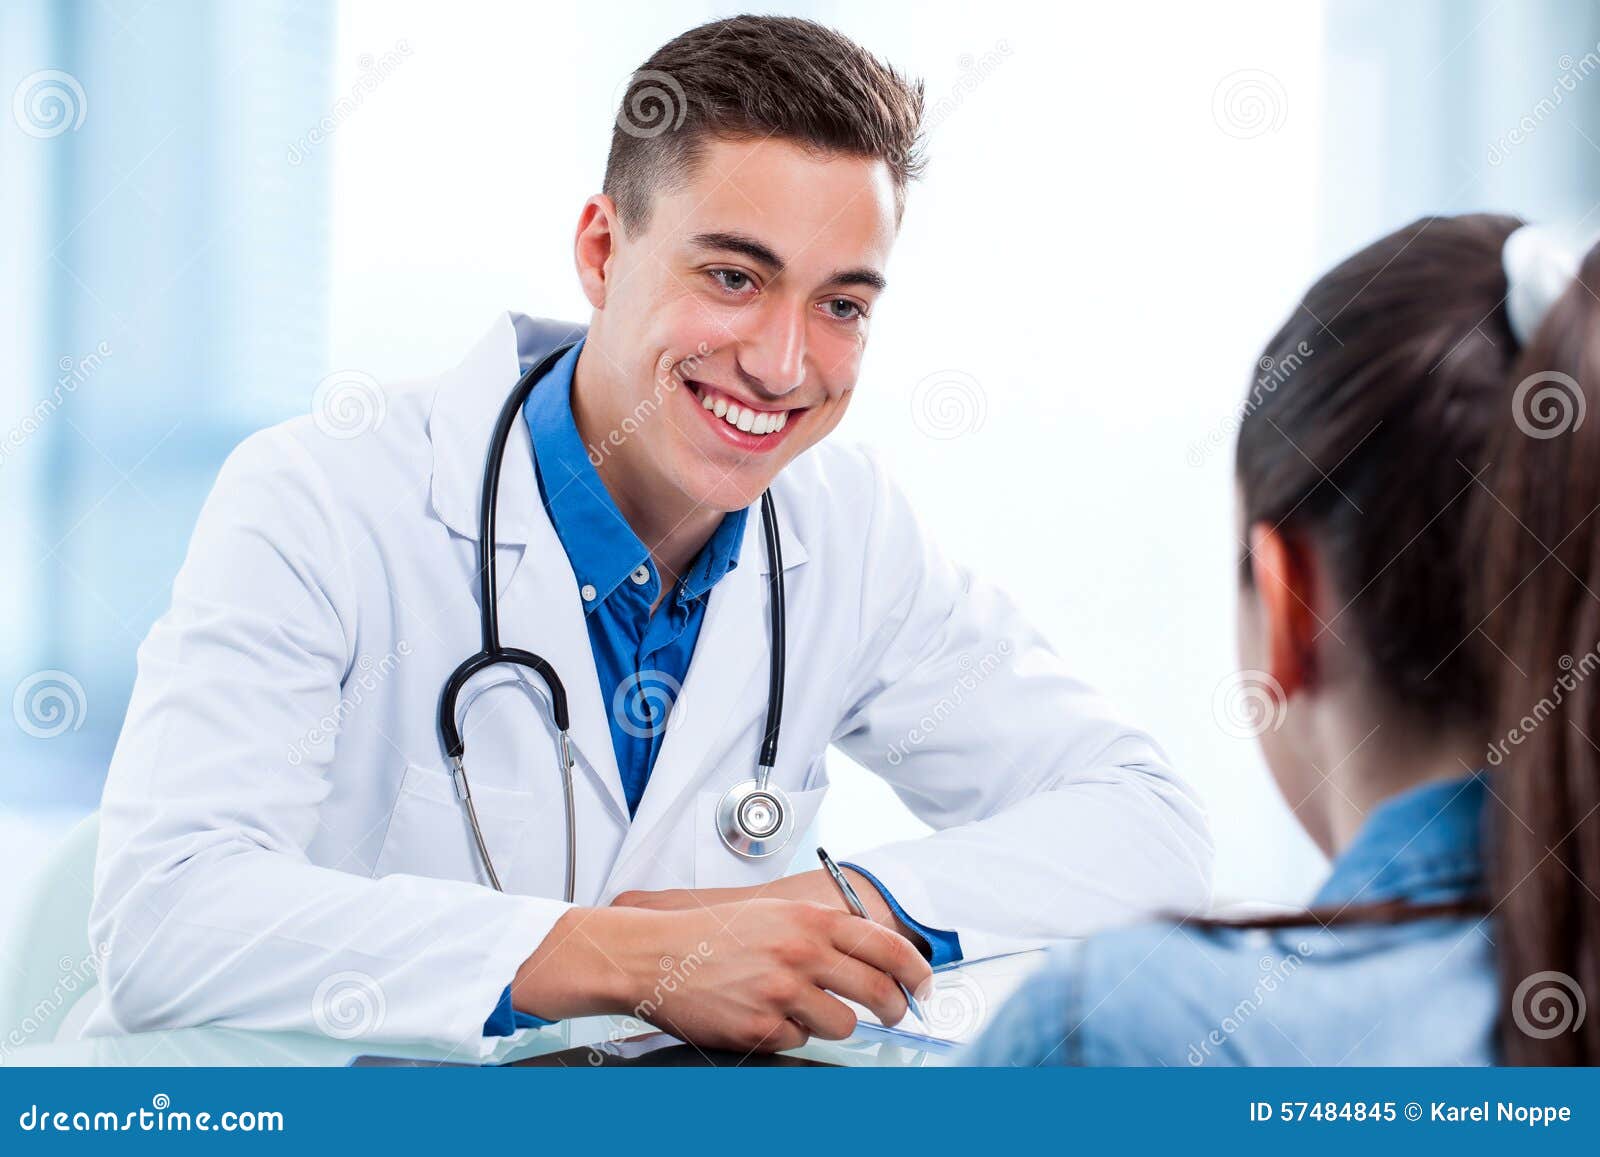 Medical Doctor With Patient